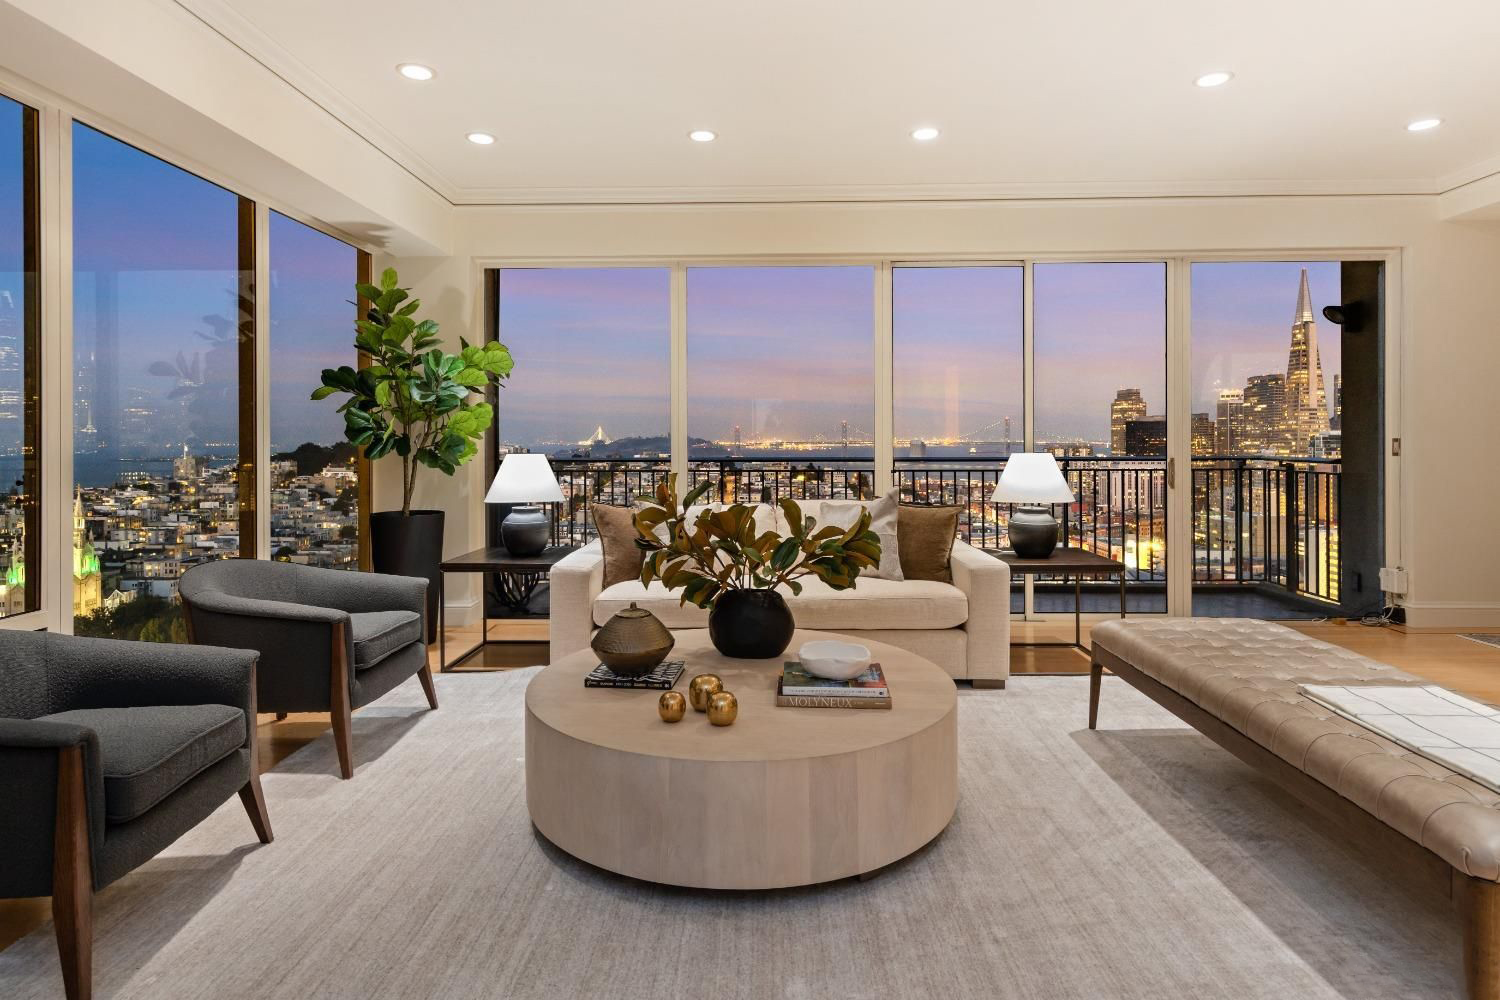 Co-op Apartment with Spectacular Bay and City Views, 1750 Taylor ST, Residence 603 Main Image